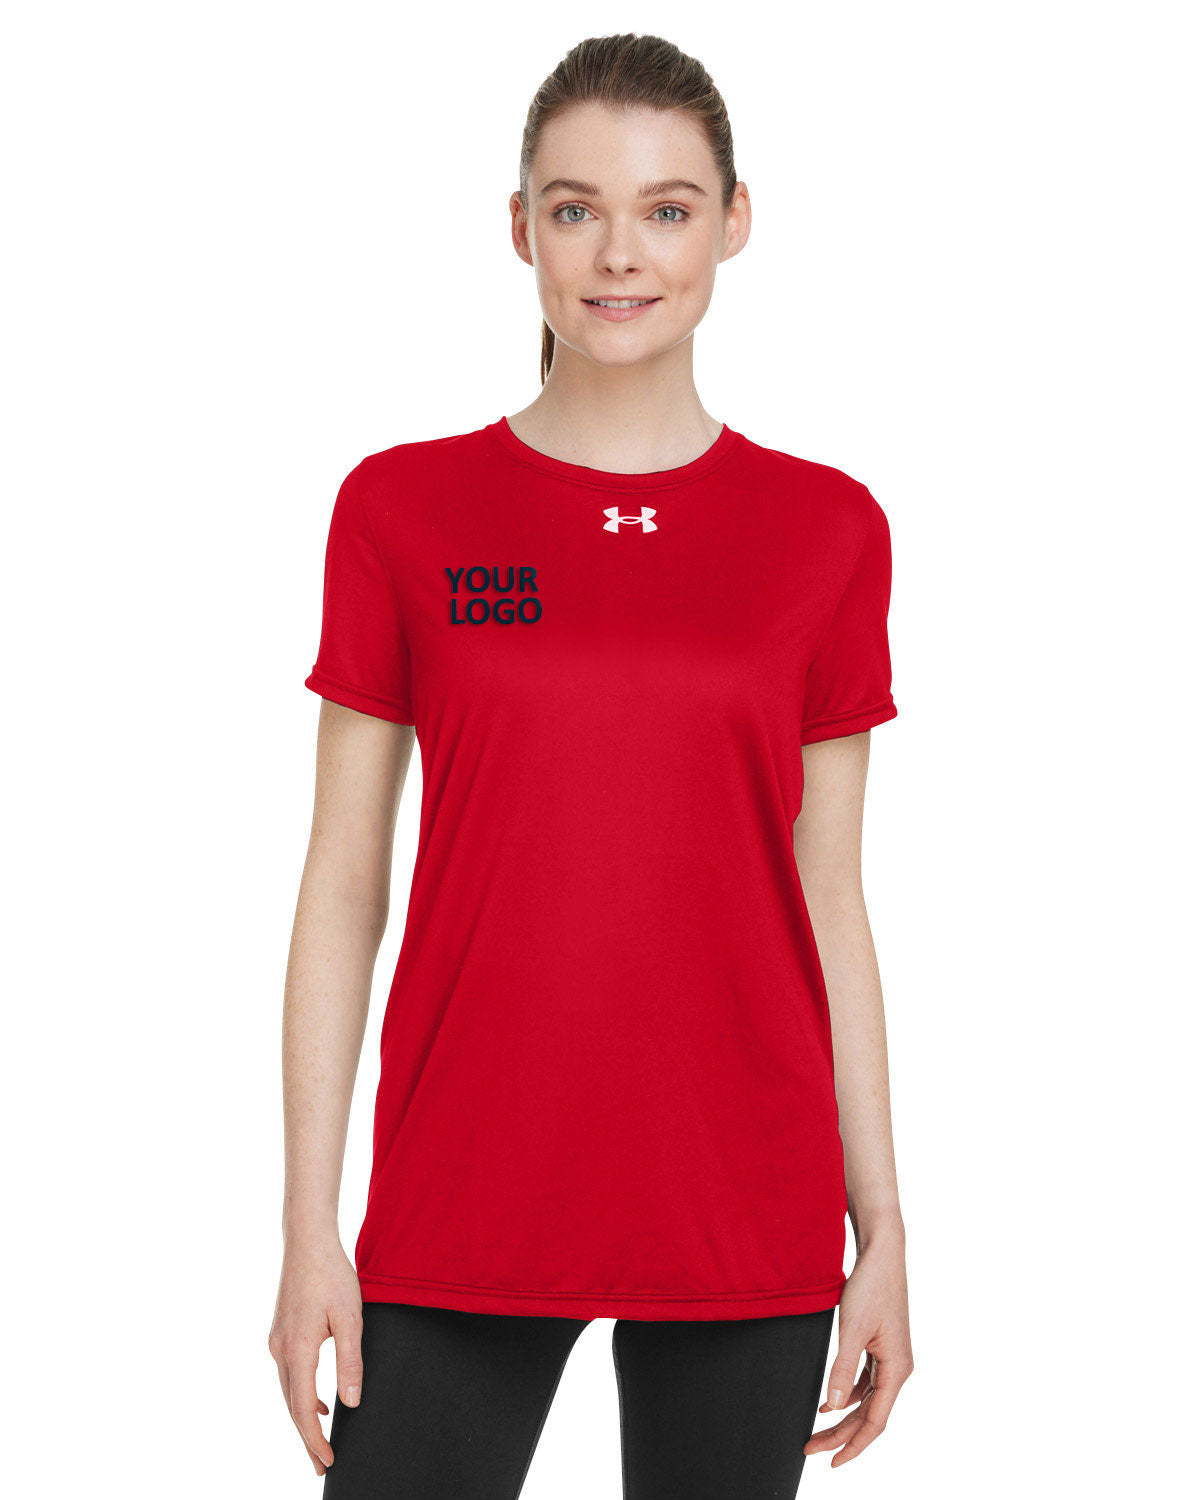 Under Armour Ladies Tech Branded T-Shirts, Red